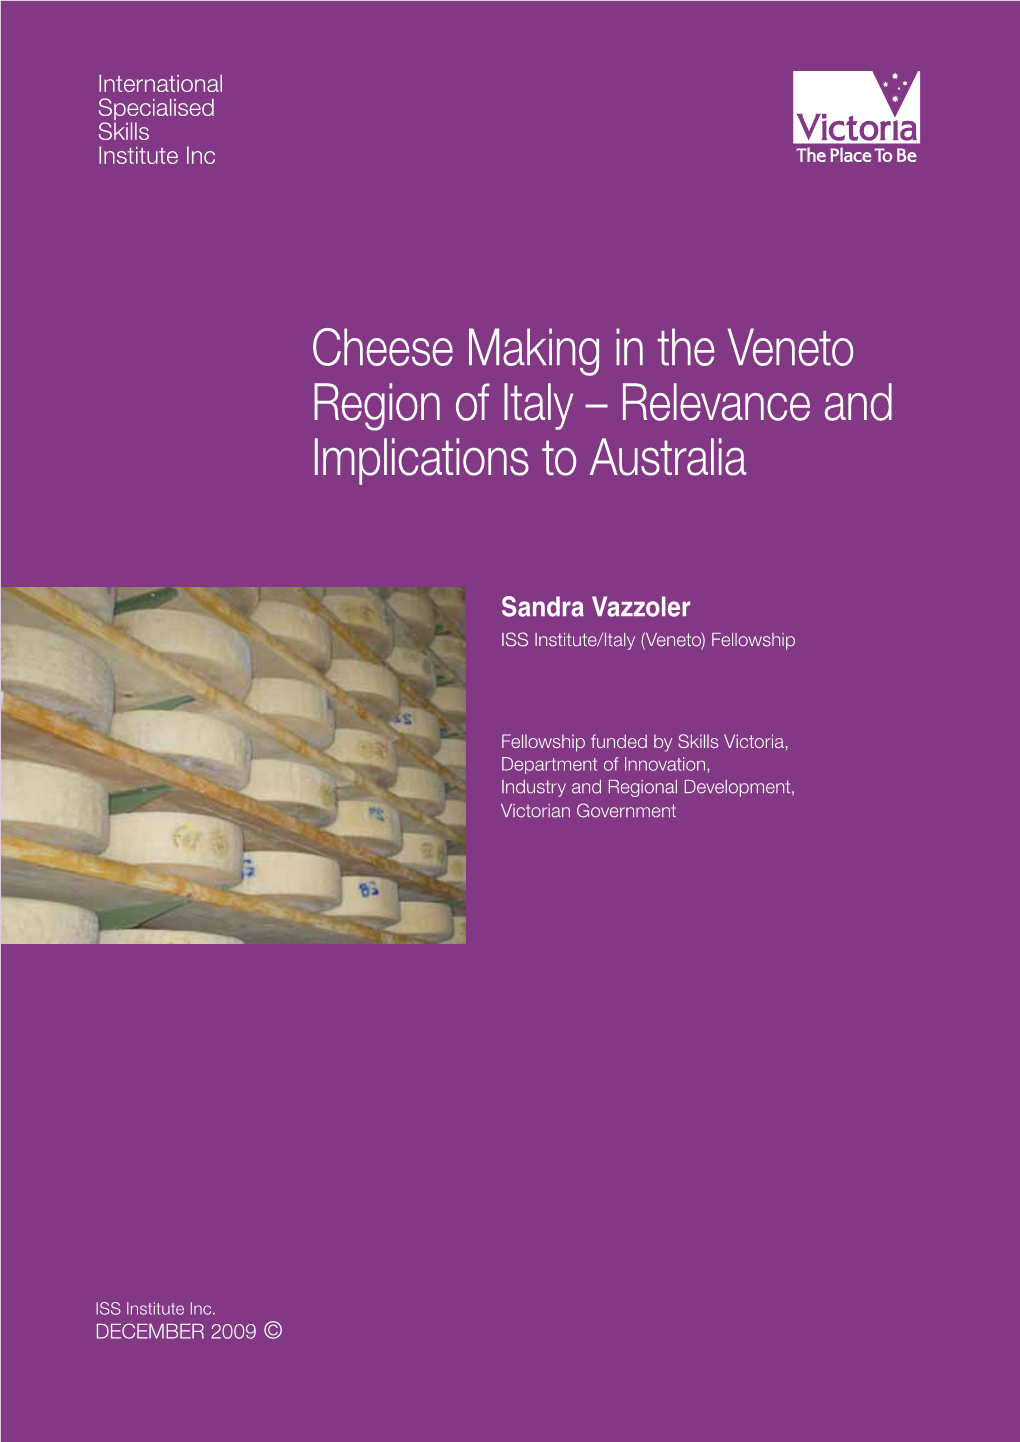 Cheese Making in the Veneto Region of Italy – Relevance and Implications to Australia